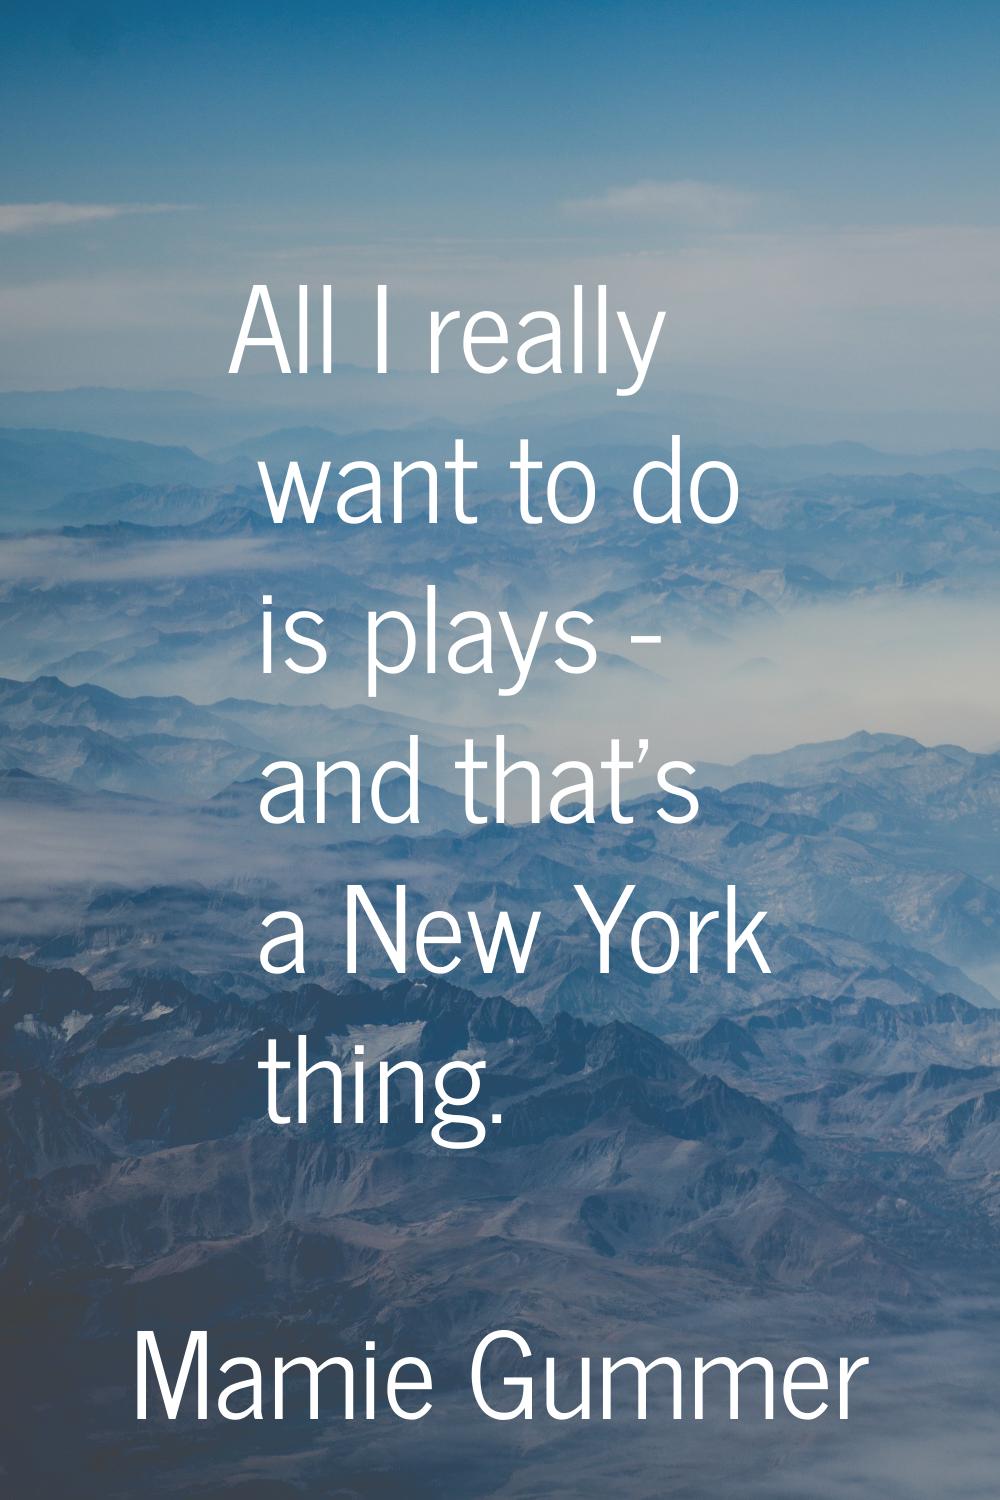 All I really want to do is plays - and that's a New York thing.